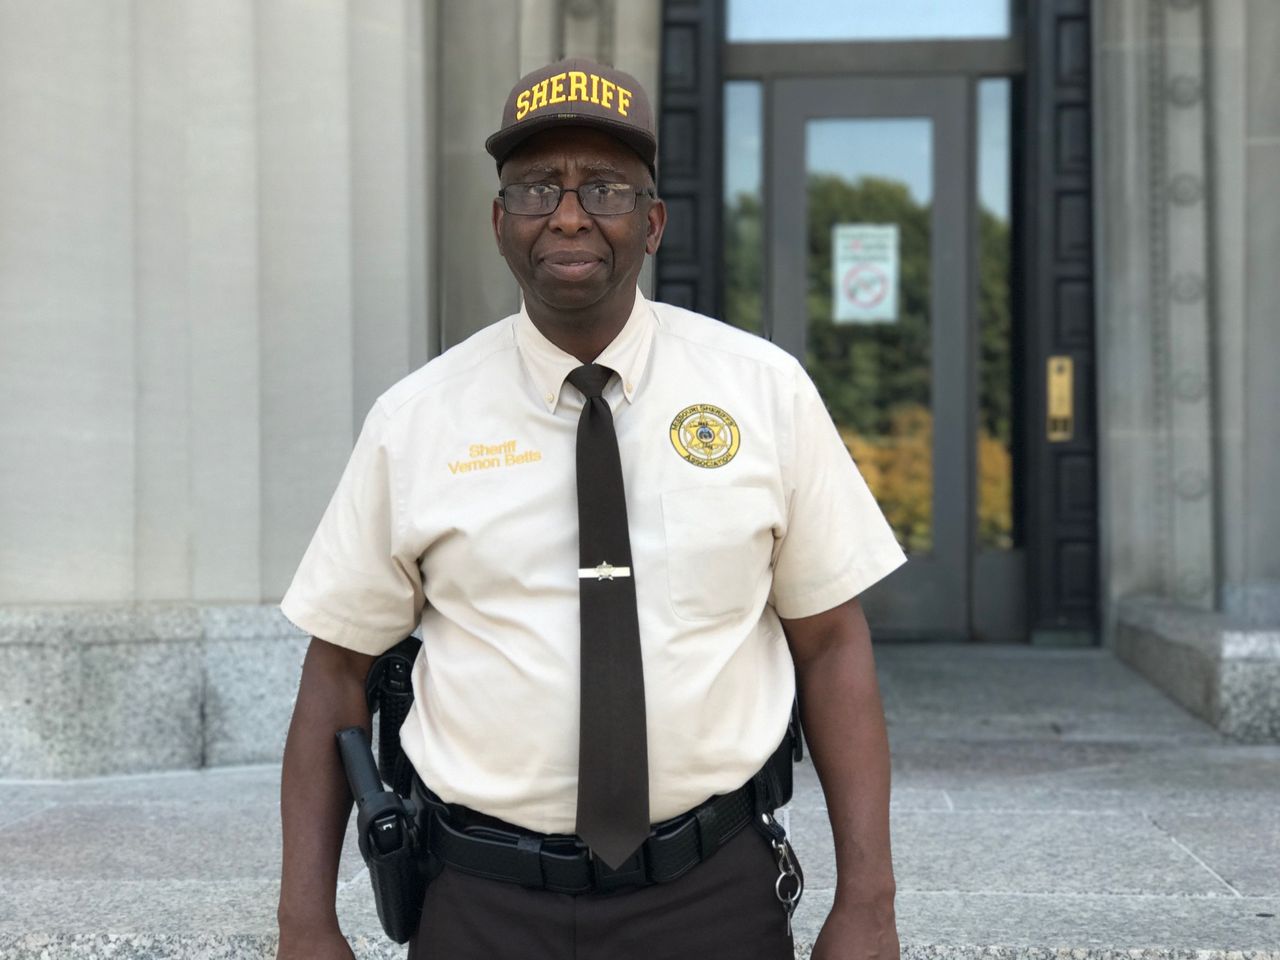 St Louis Sheriff Vernon Betts was involved in preparations for the Jason Stockley verdict.